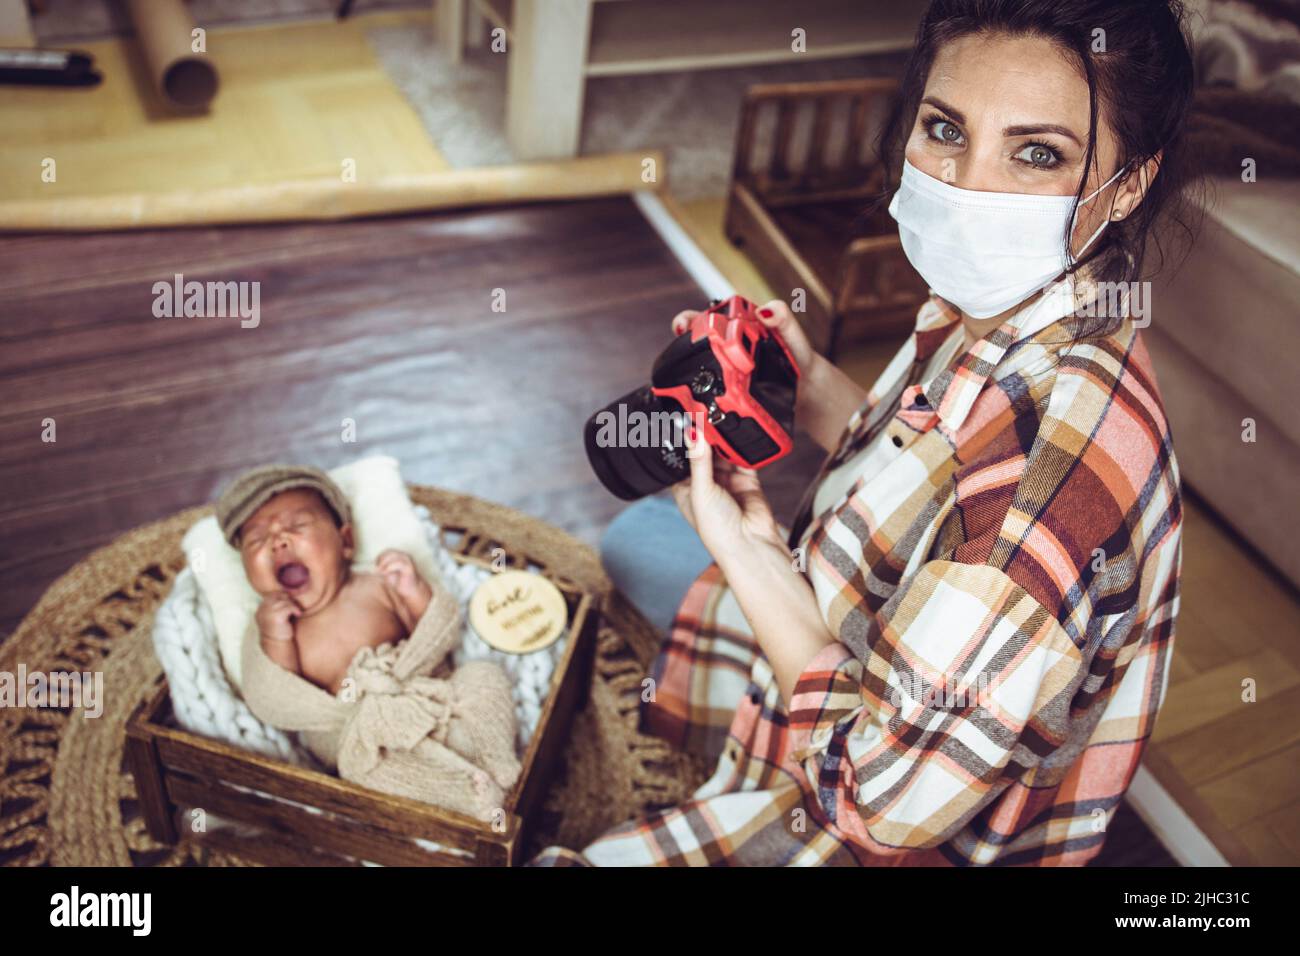 Female photographer taking photos of an infant in a photoshoot Stock Photo